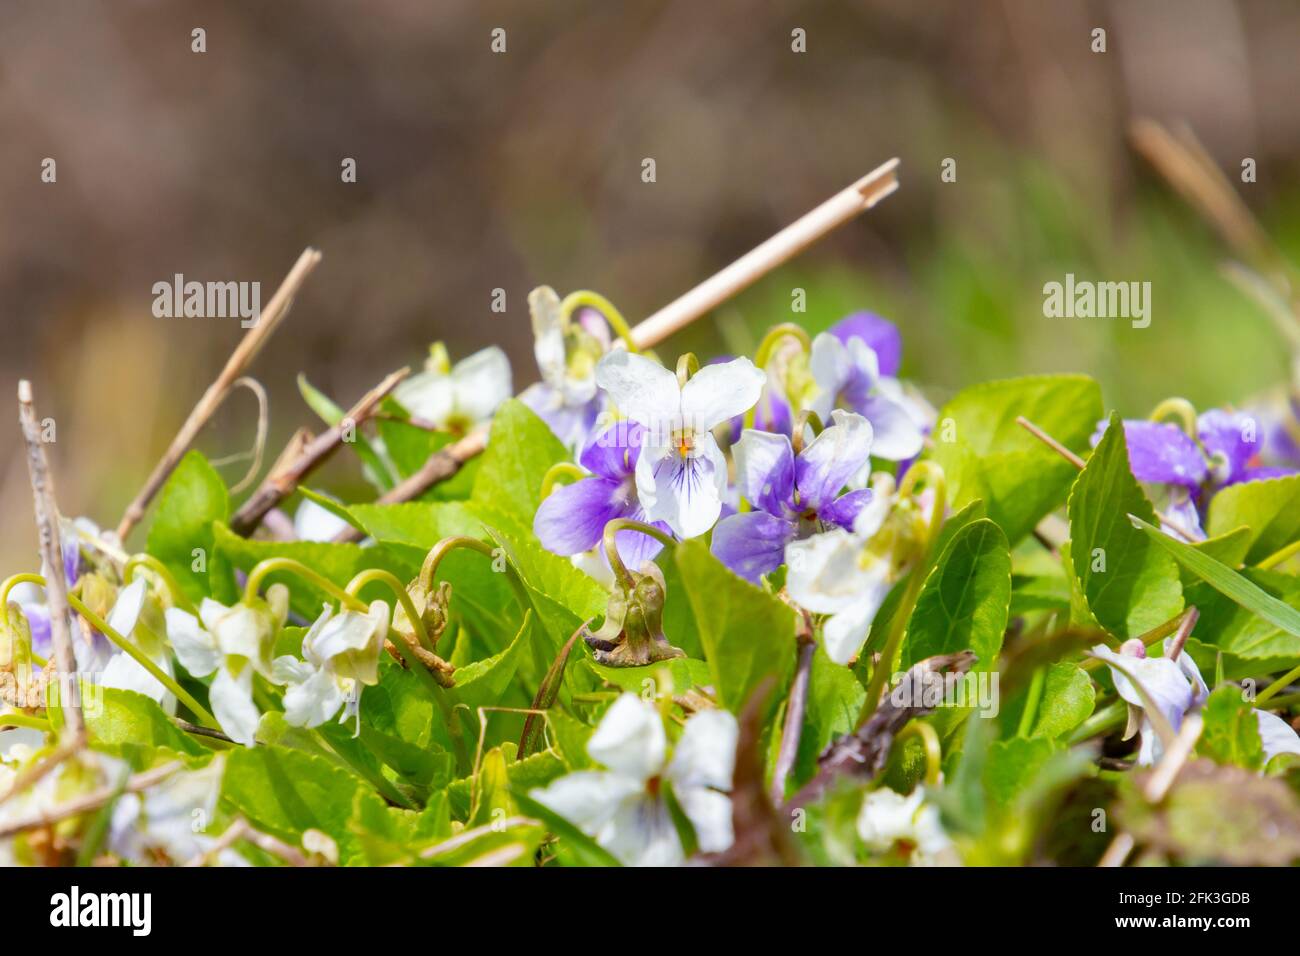 White violet with white and violet blossoms, also called Viola alba Stock Photo